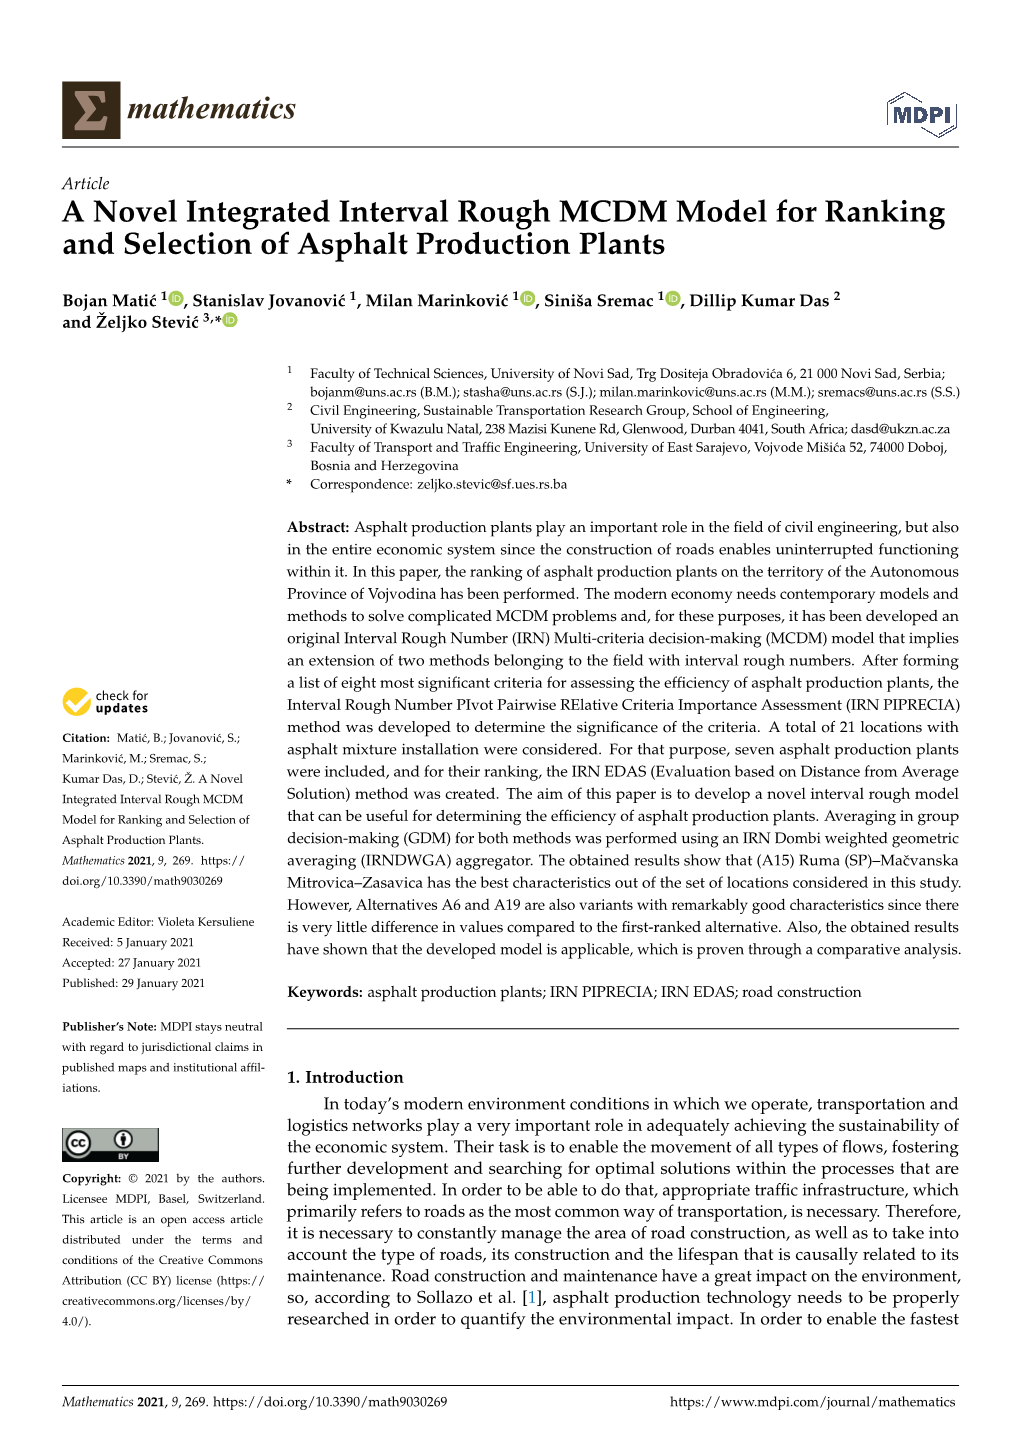 A Novel Integrated Interval Rough MCDM Model for Ranking and Selection of Asphalt Production Plants